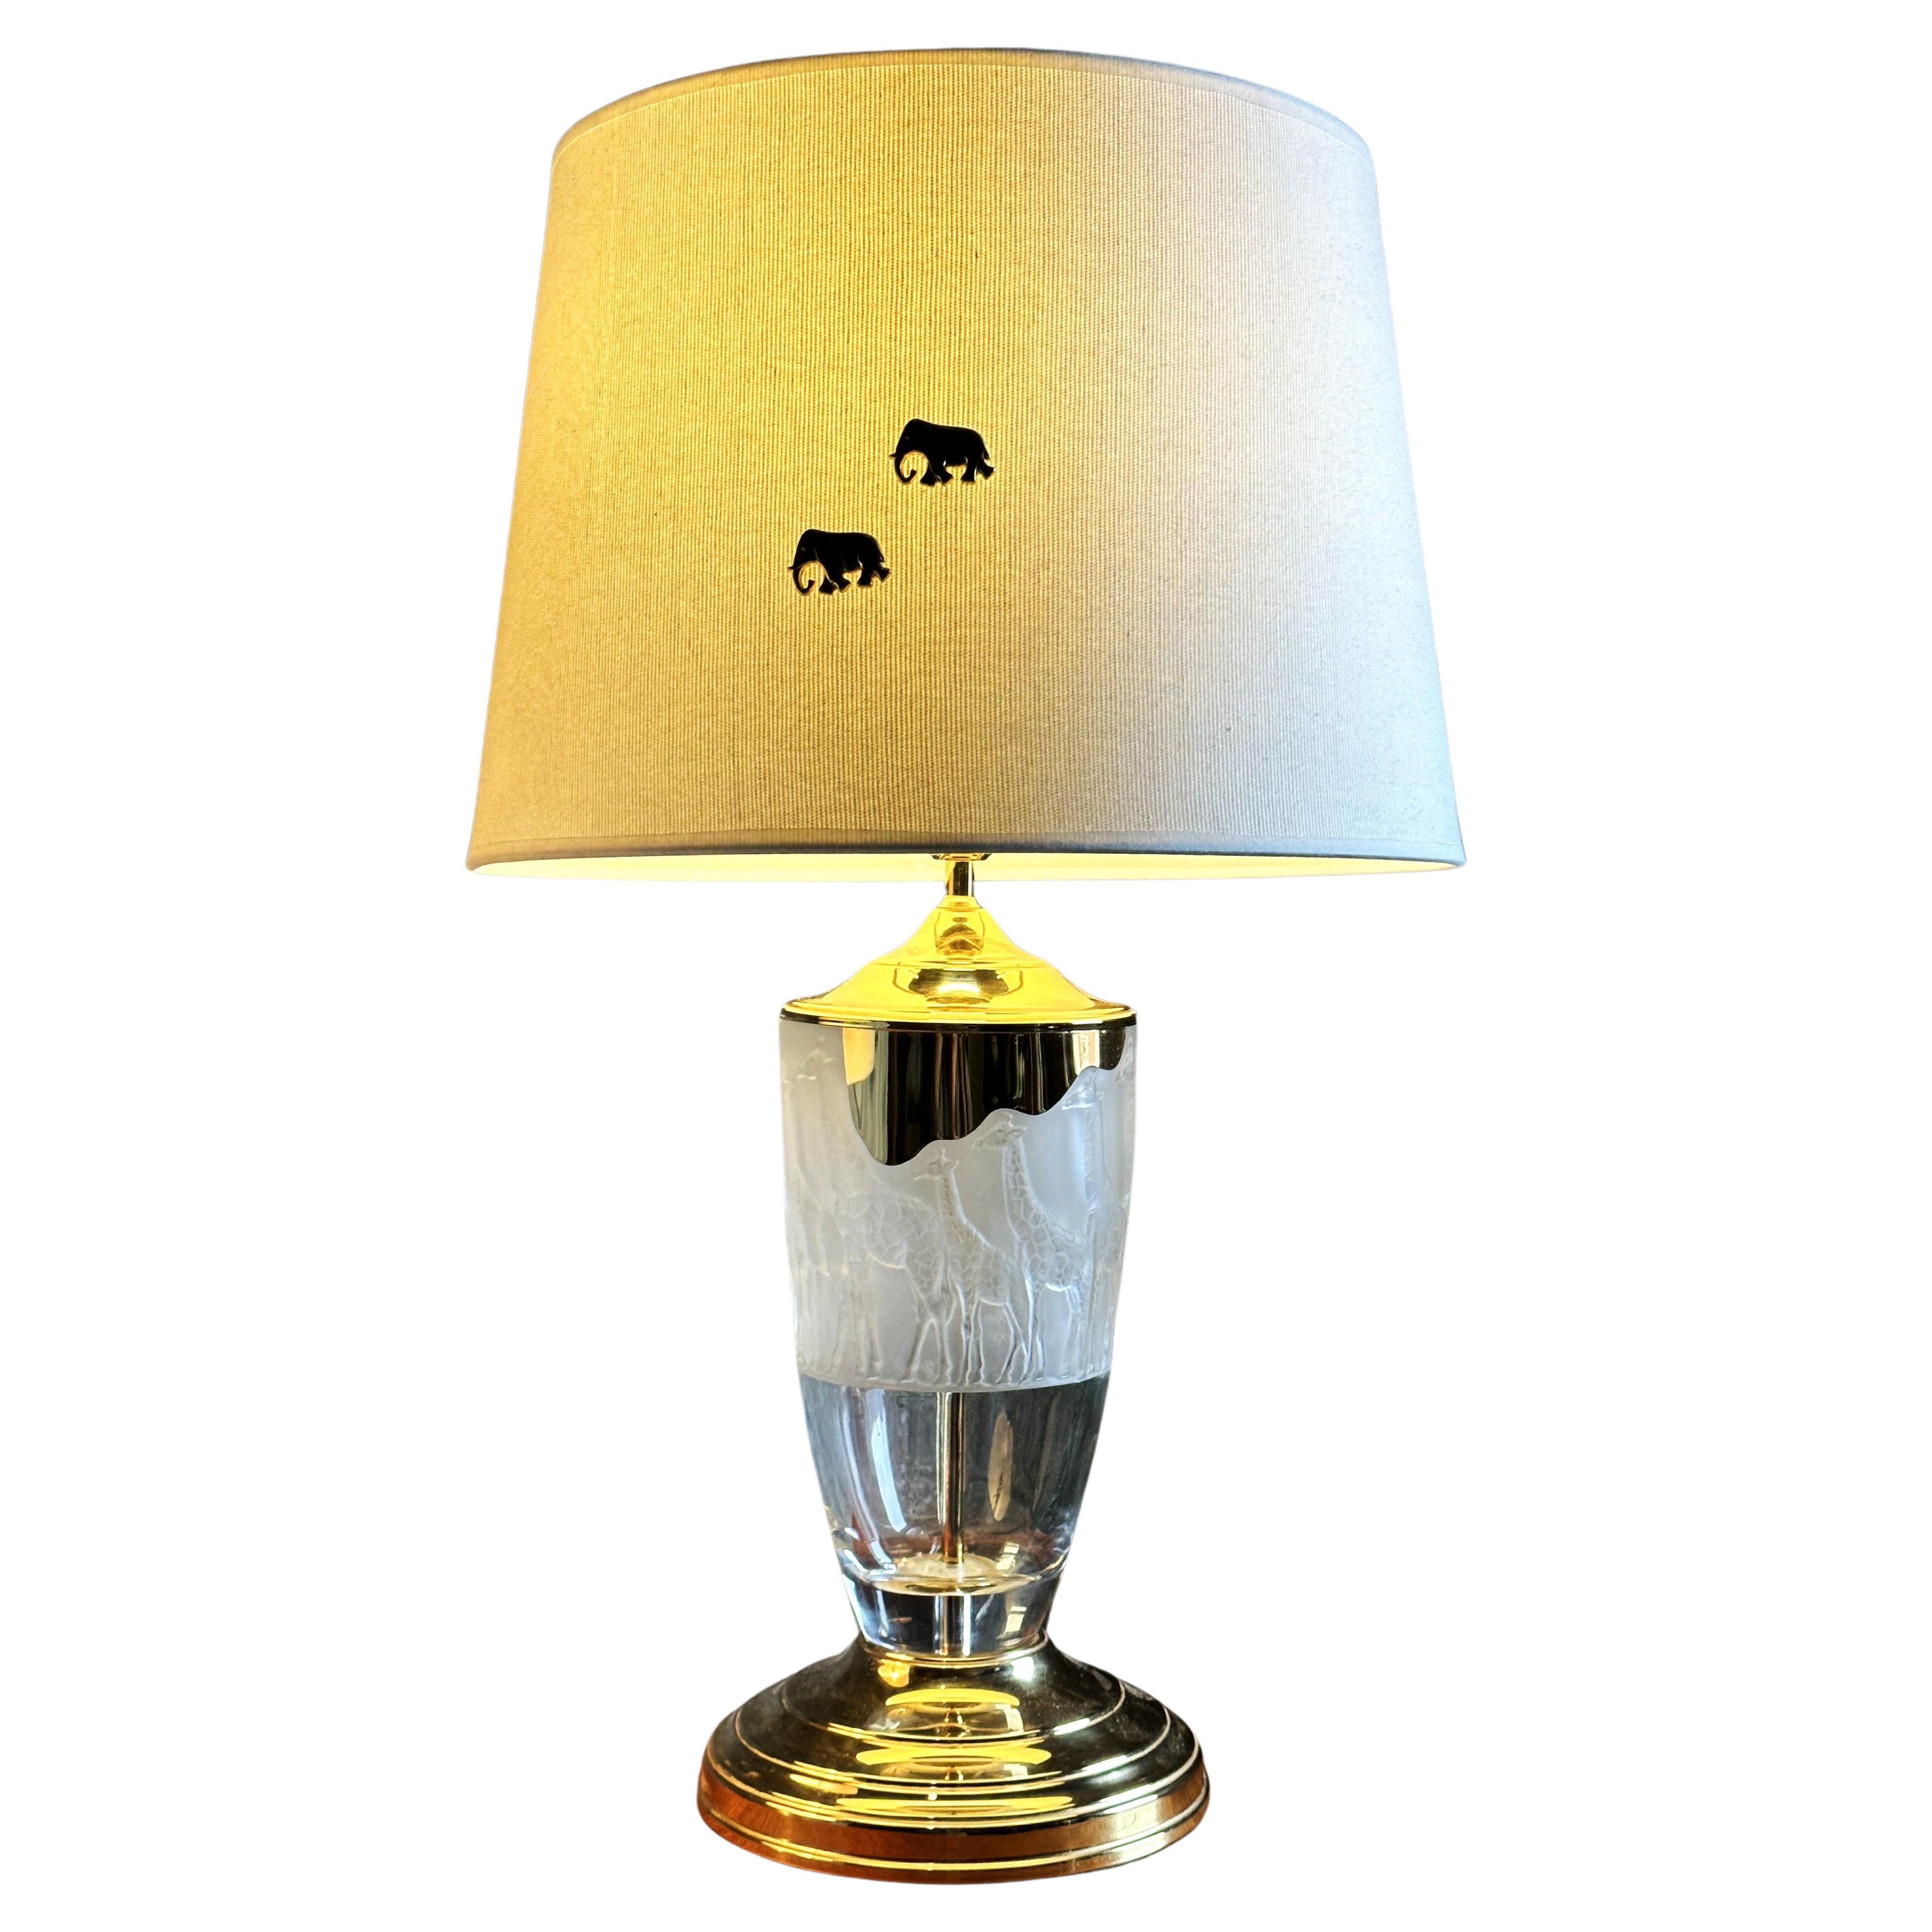 Murano Table Lamp, Africa Animal, Brass and Glass. Italy 1960s